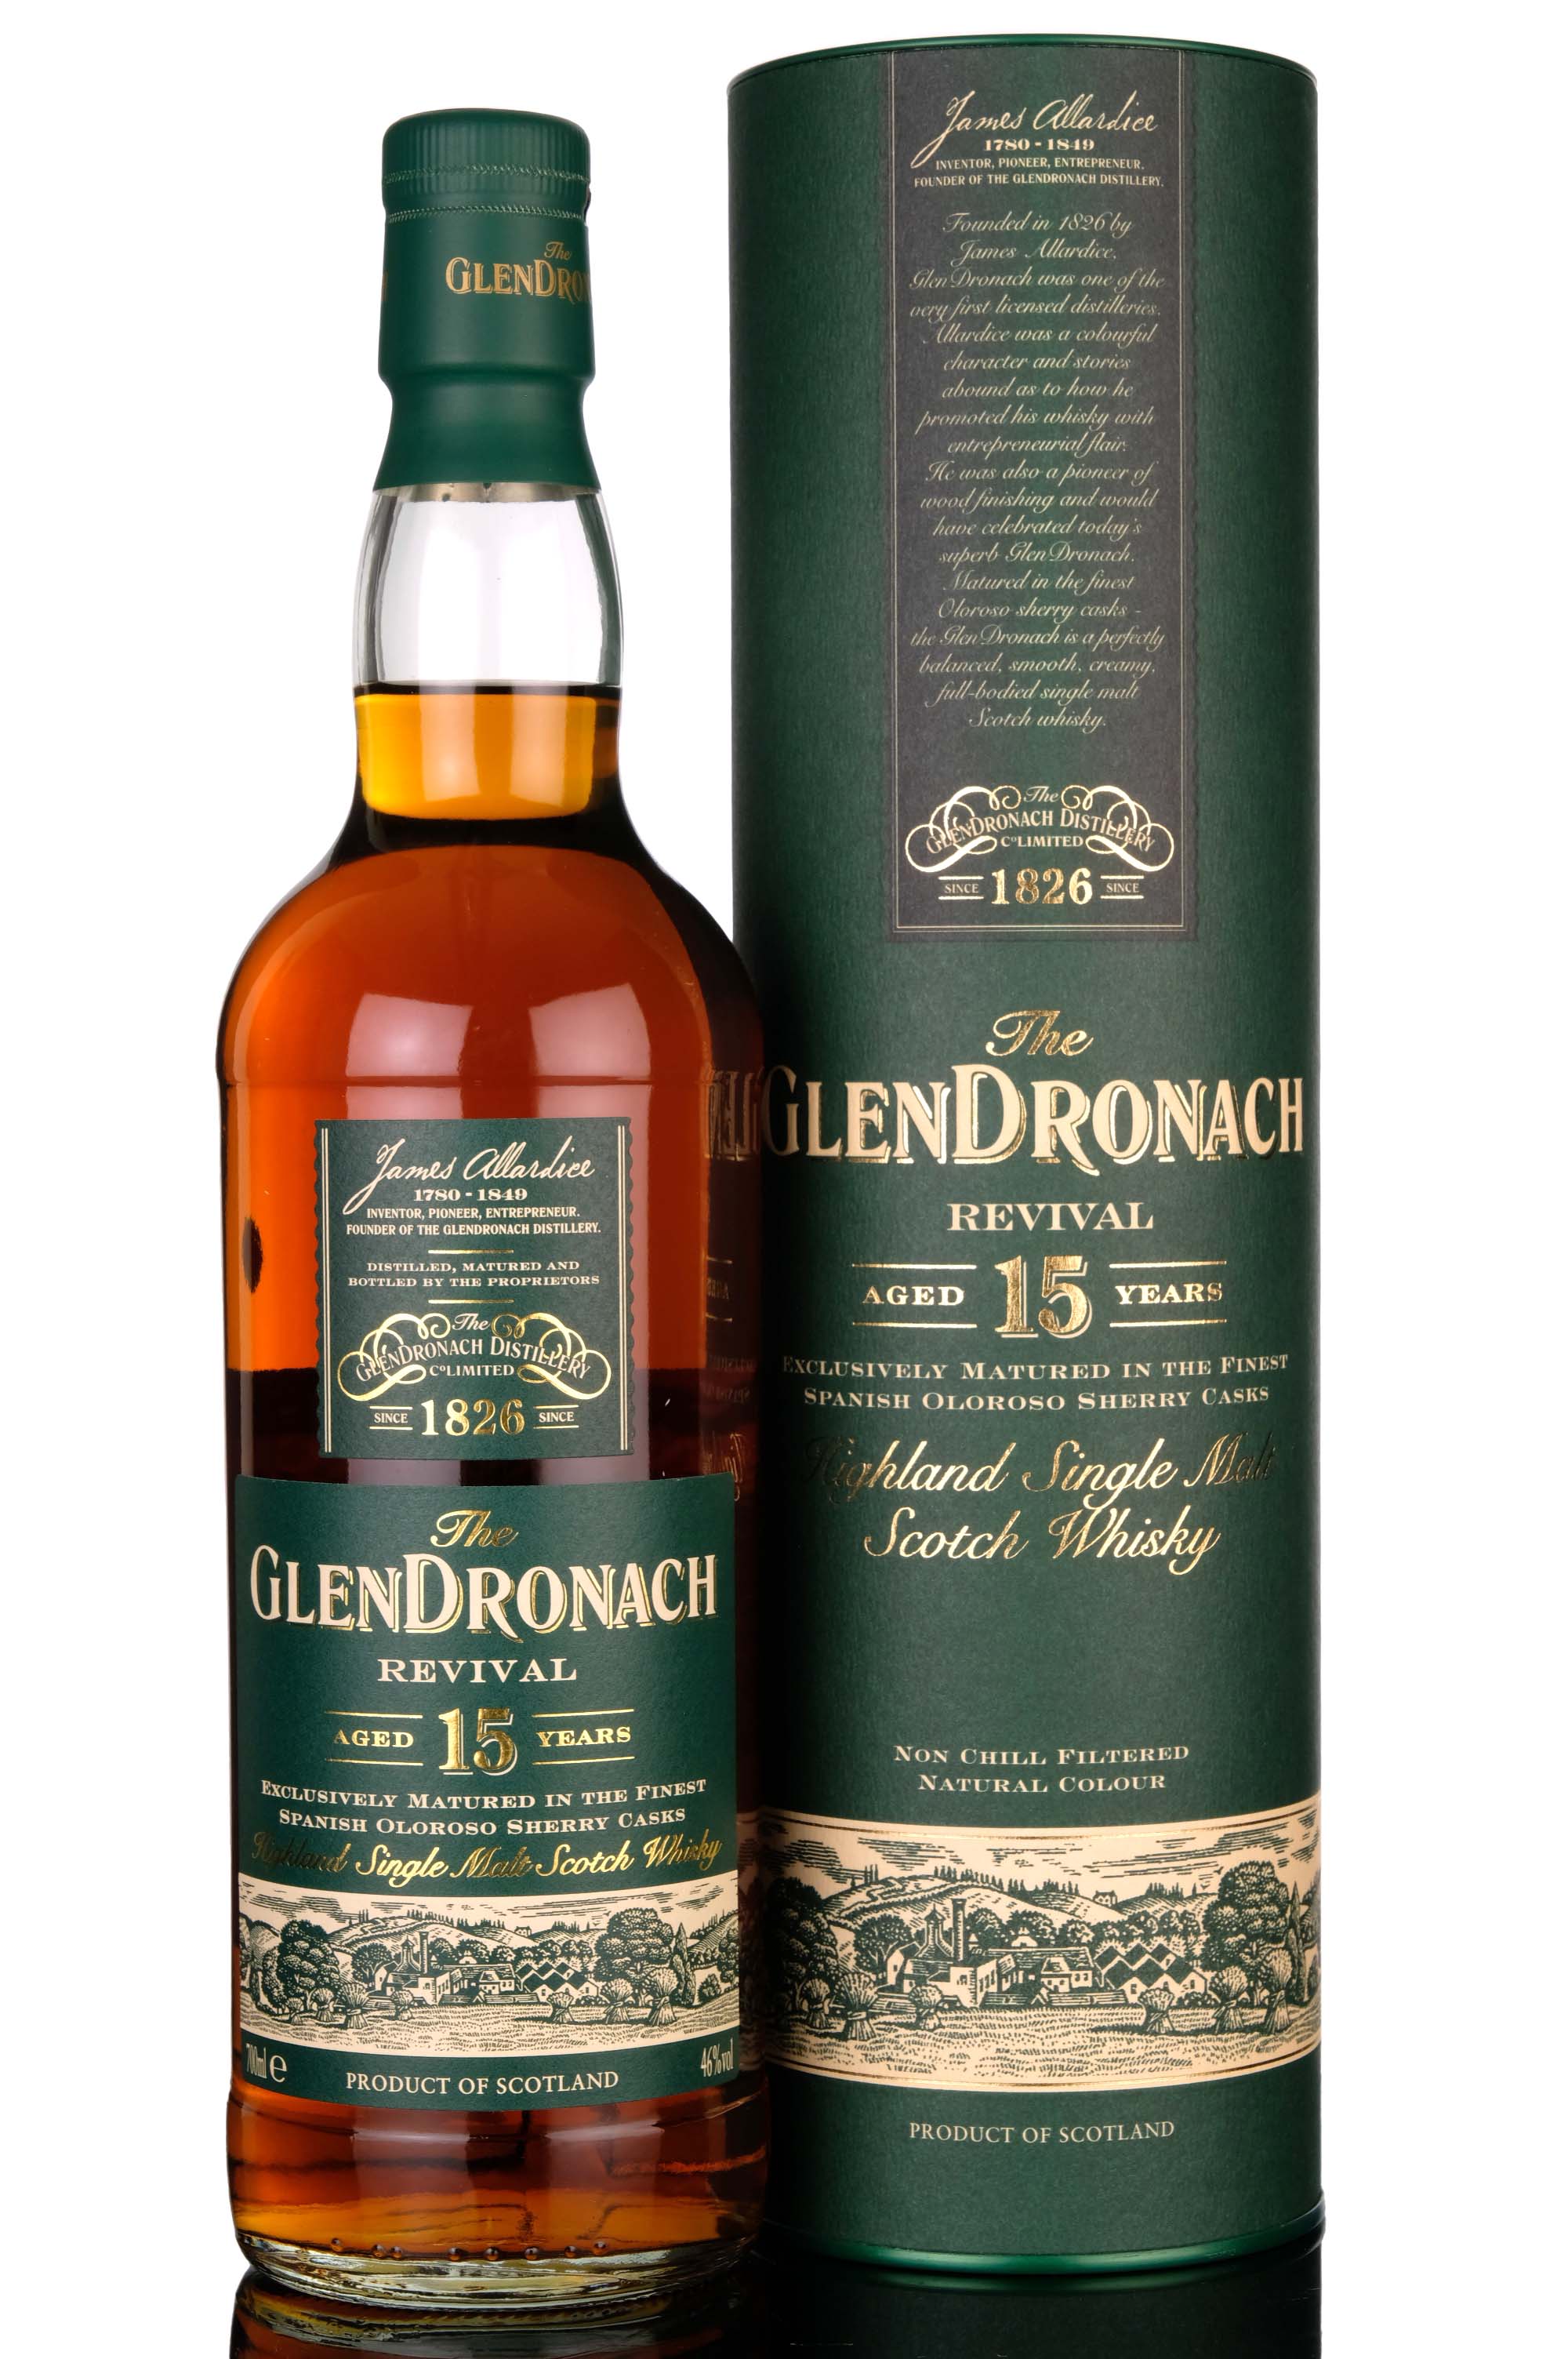 Glendronach 15 Year Old - Revival - 2015 Release